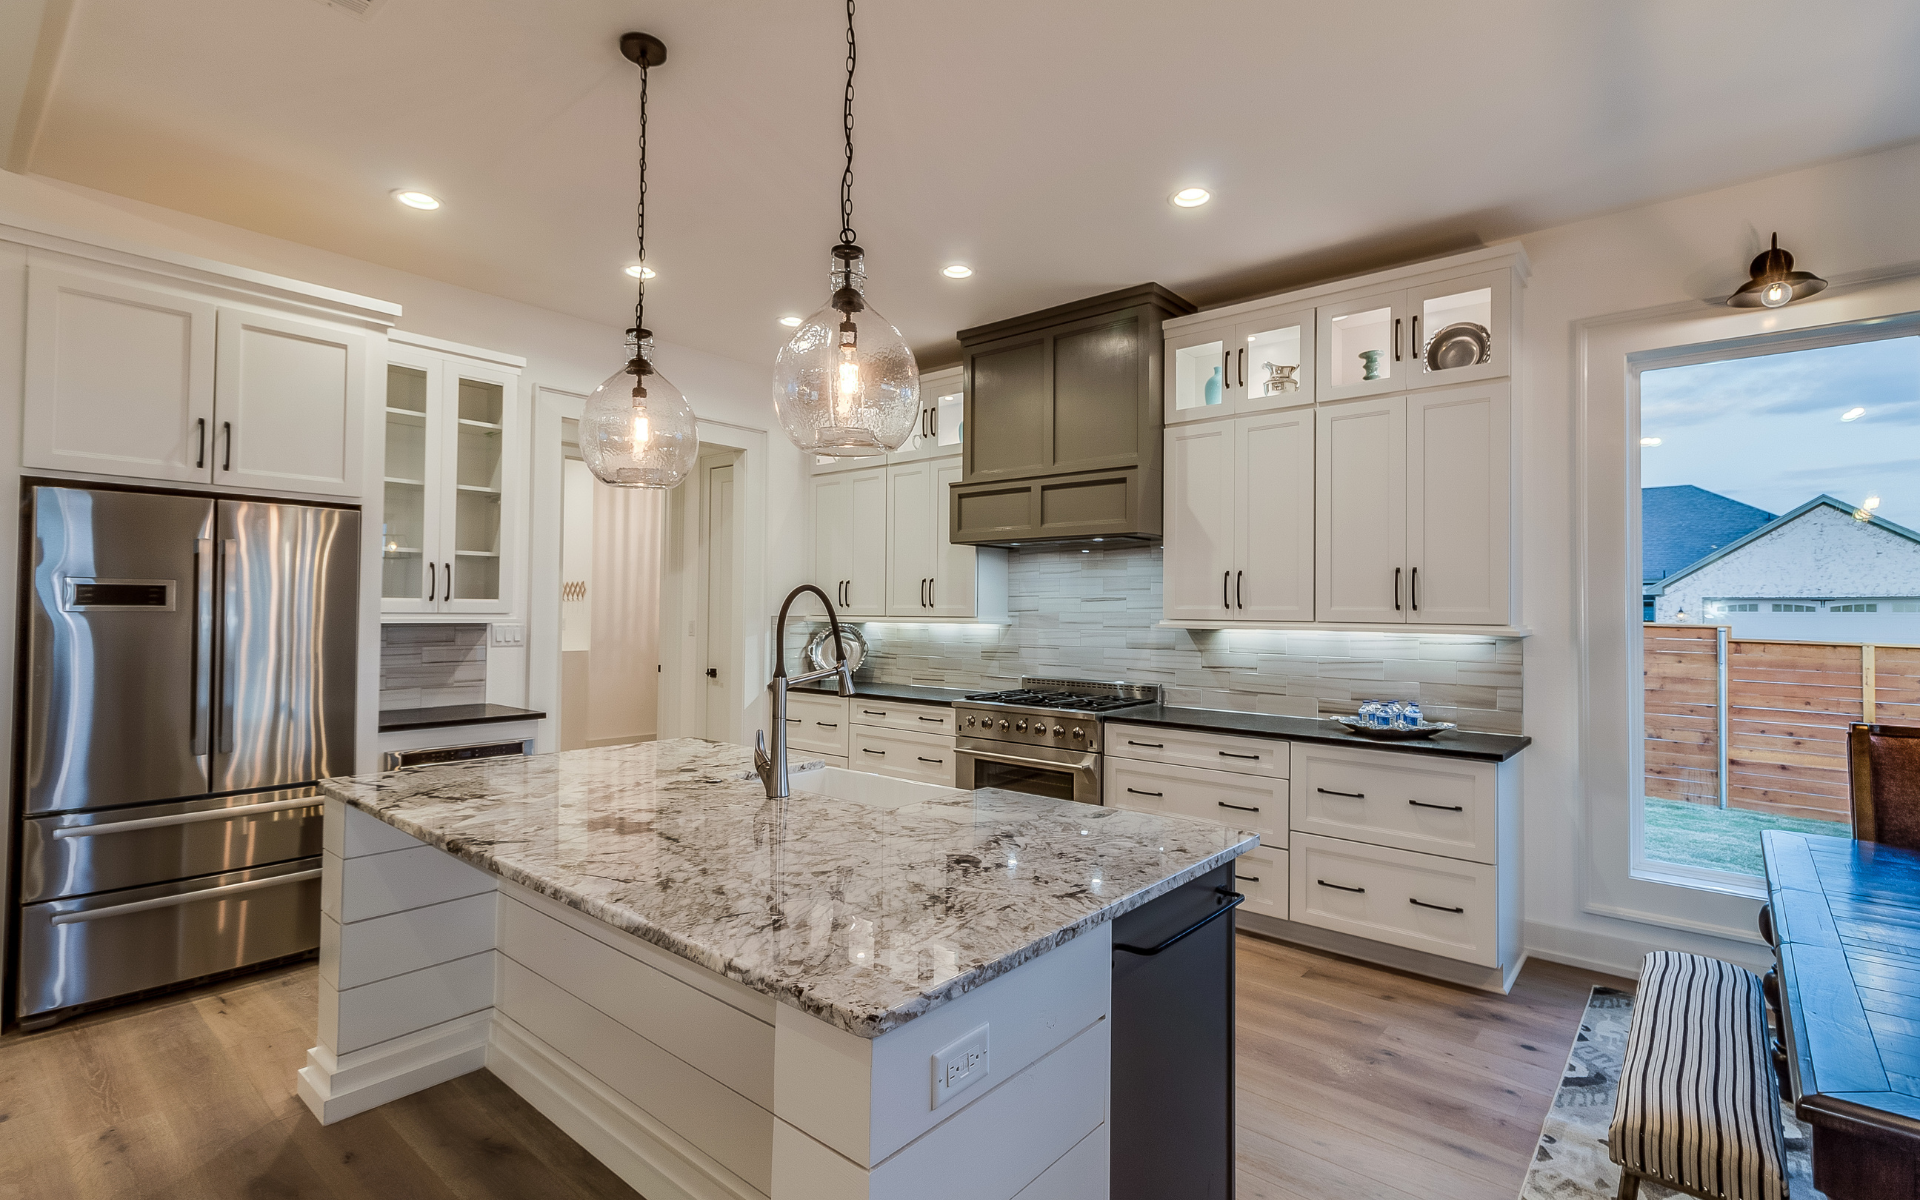 Luxury L type kitchen with white tops